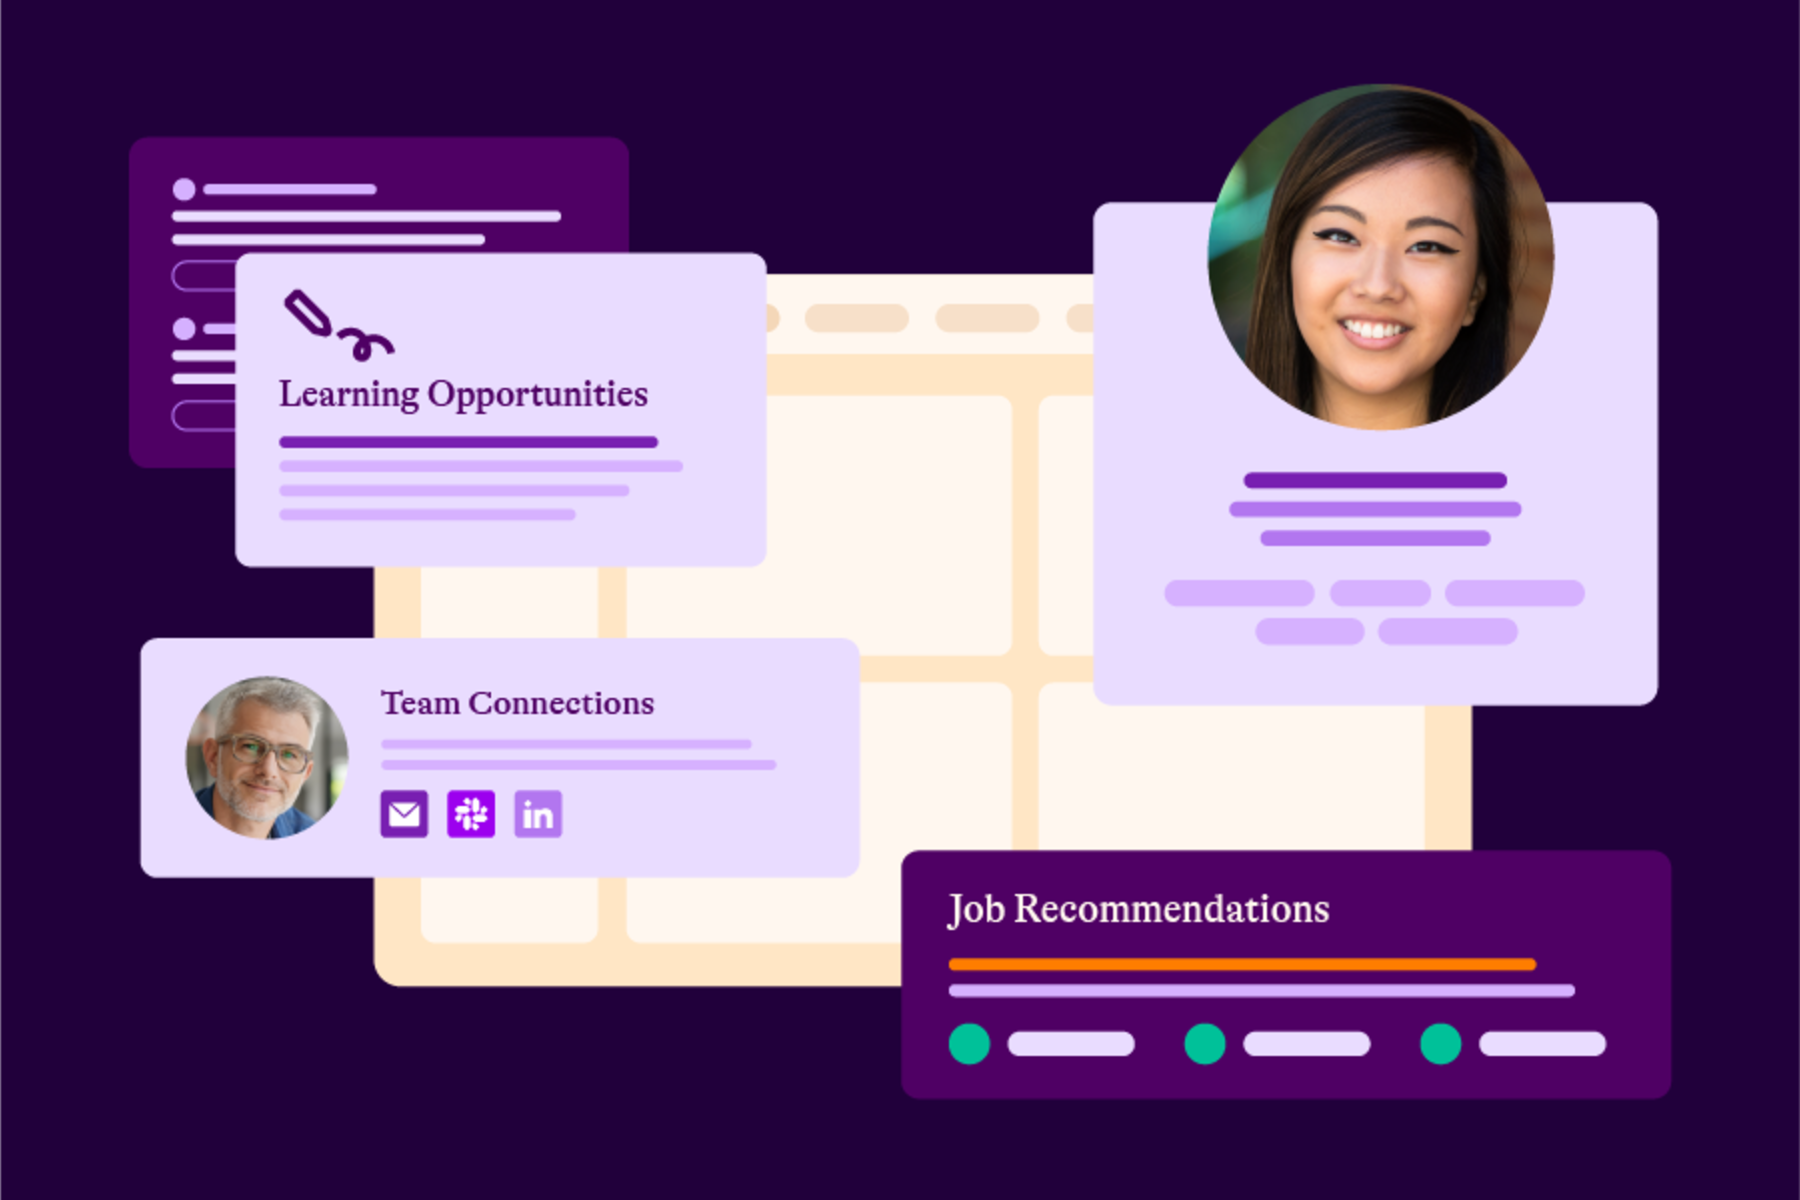 a graphic illustration of SeekOut's internal talent product demonstrating potential learning opportunities, team connections, and job recommendations that the platform can surface to a company's employees through an internal talent marketplace